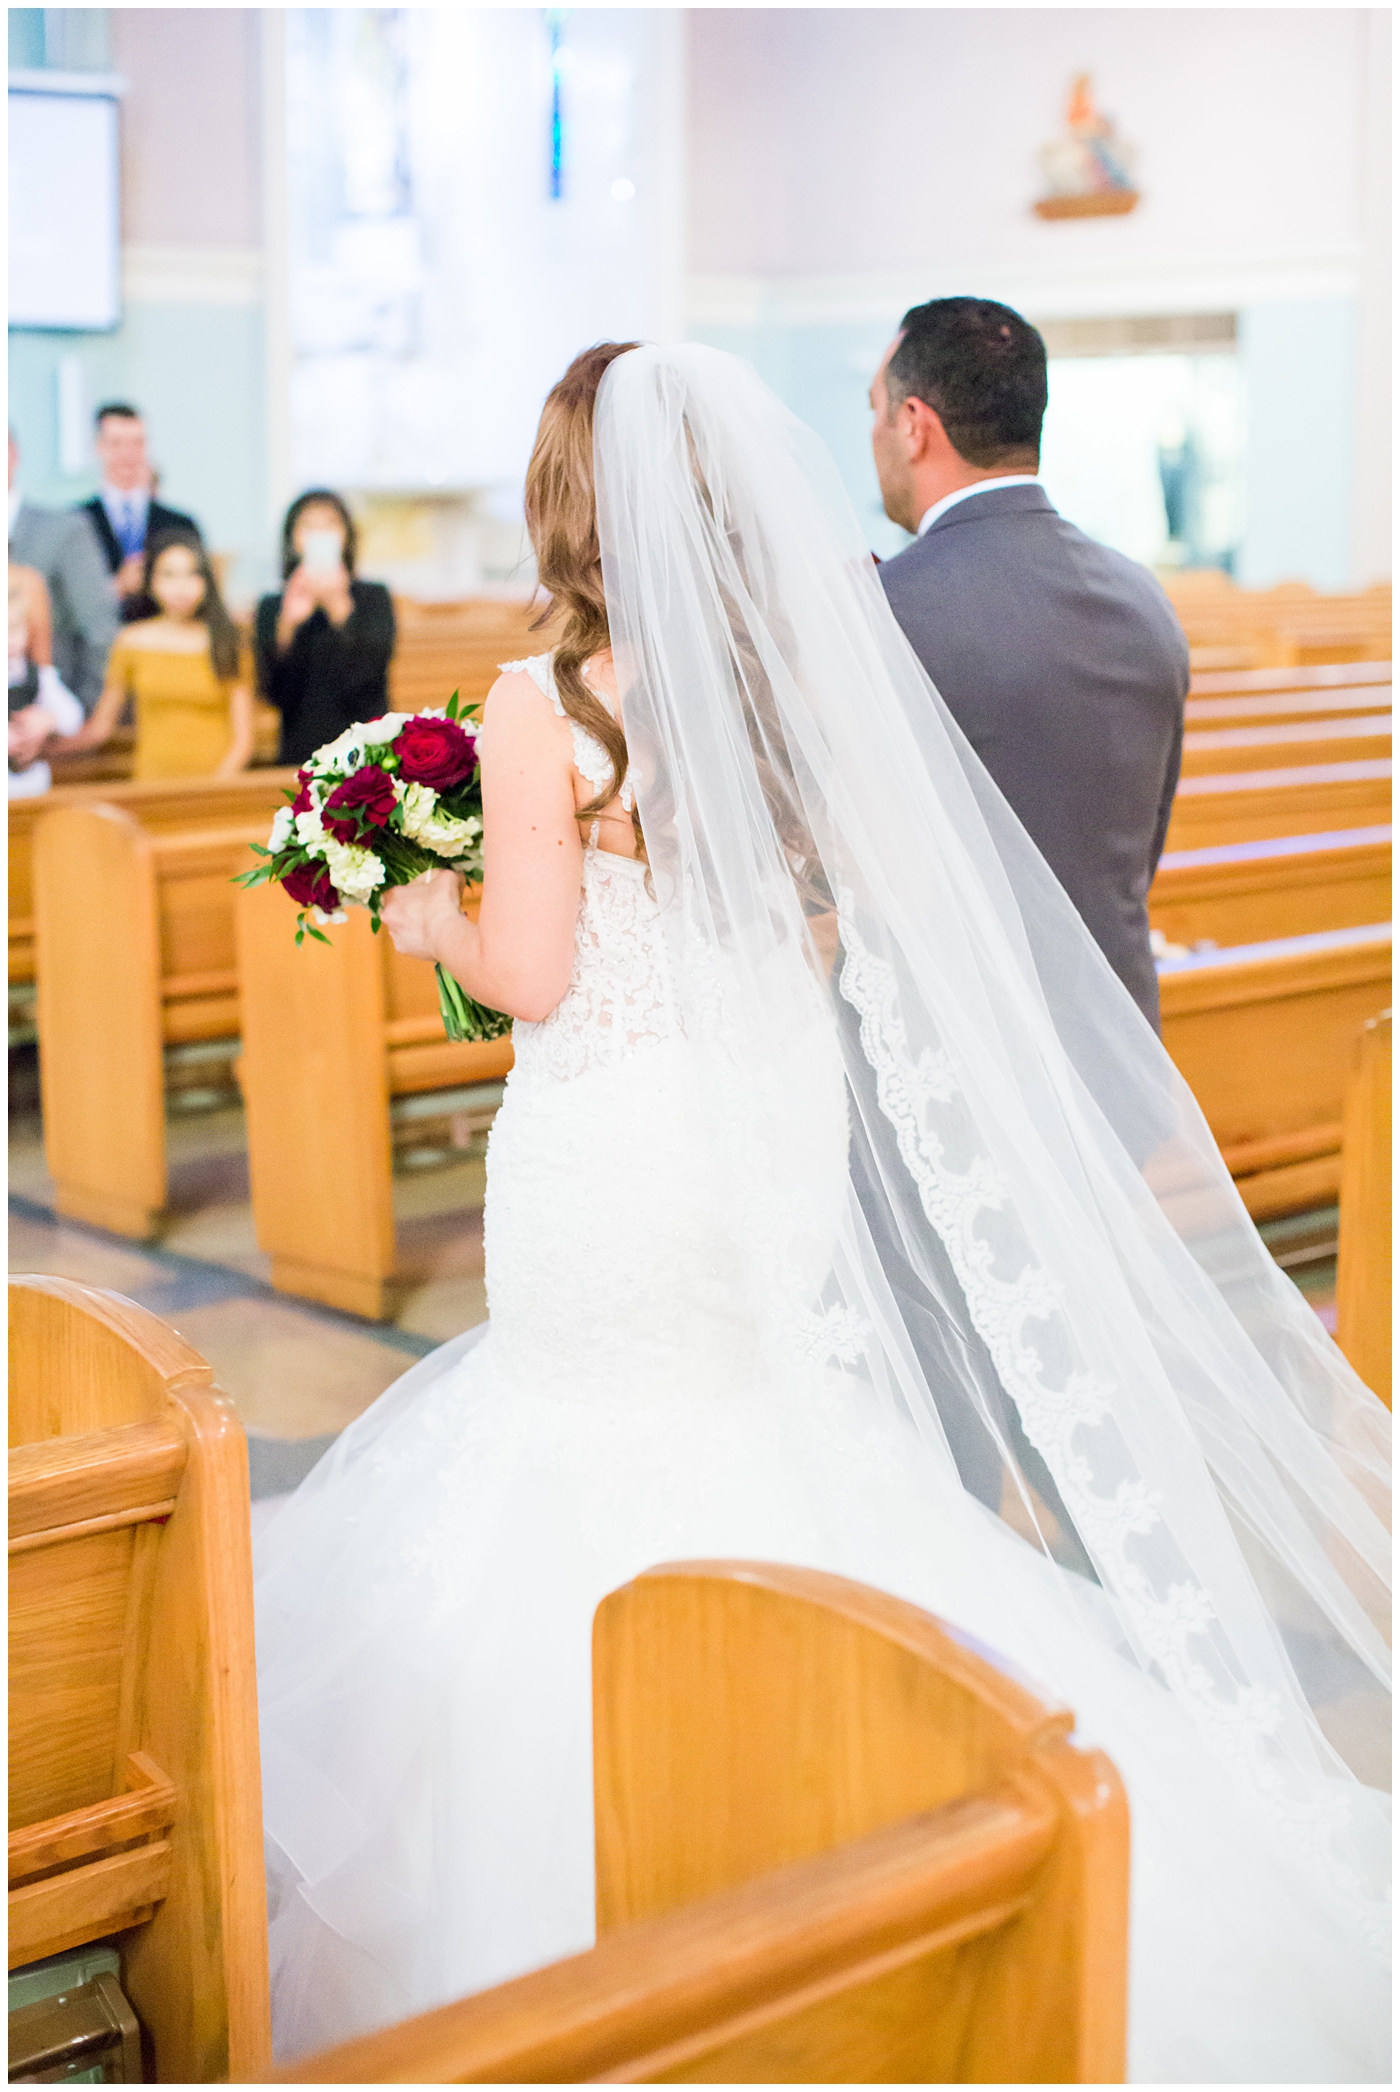 bride in morilee wedding dress with red and white rose bouquet walking down the aisle